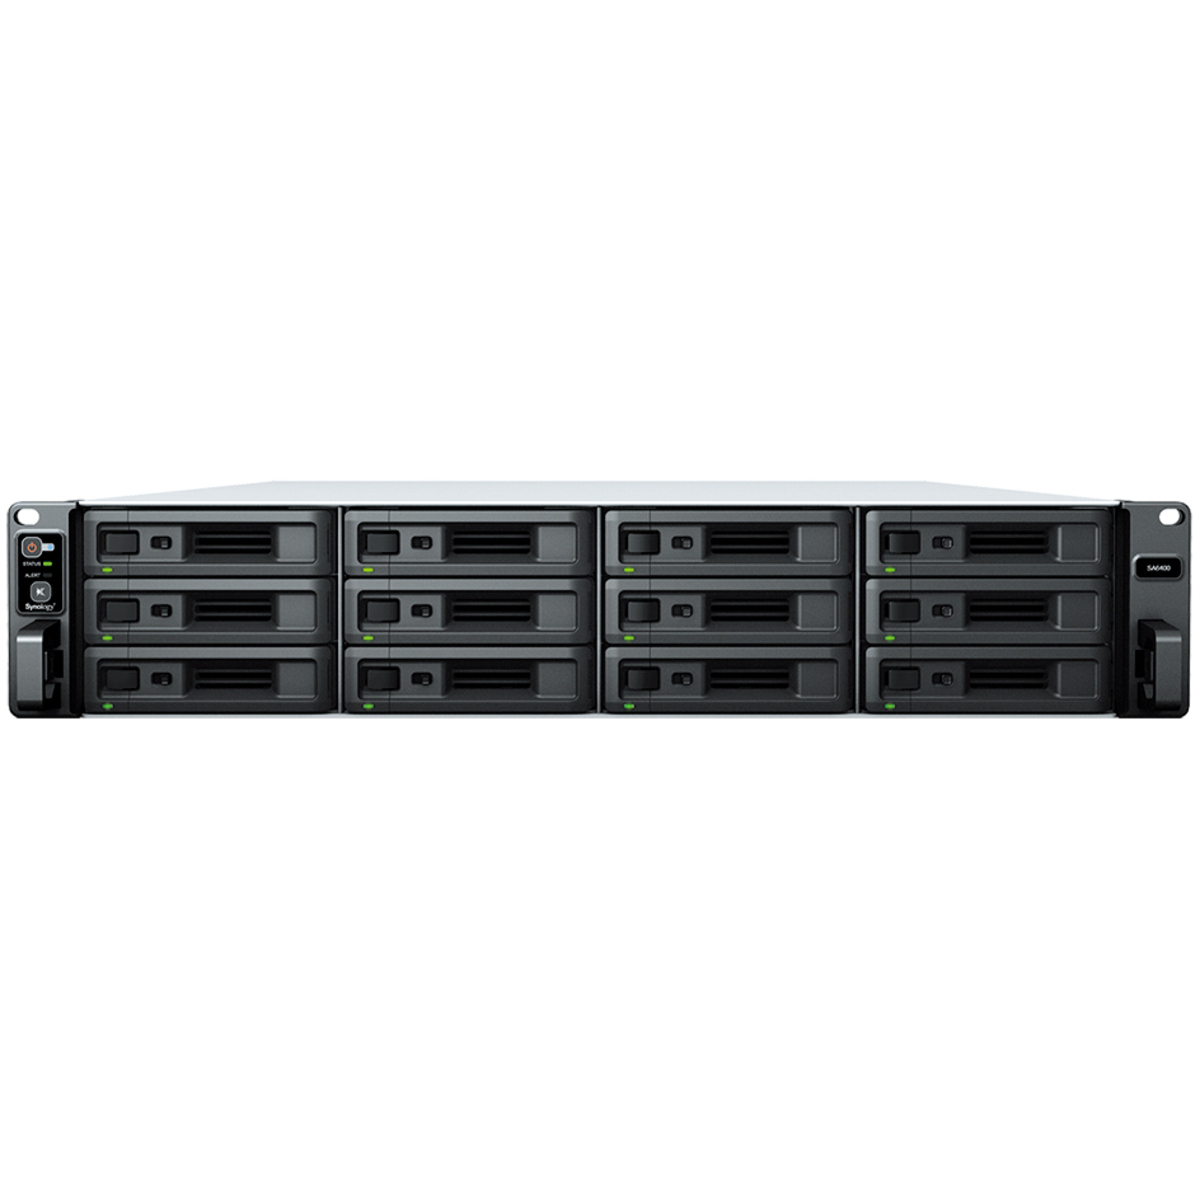 Synology RackStation SA6400 48tb 12-Bay RackMount Large Business / Enterprise NAS - Network Attached Storage Device 8x6tb Synology Plus Series HAT3300-6T 3.5 5400rmp SATA 6Gb/s HDD NAS Class Drives Installed - Burn-In Tested RackStation SA6400